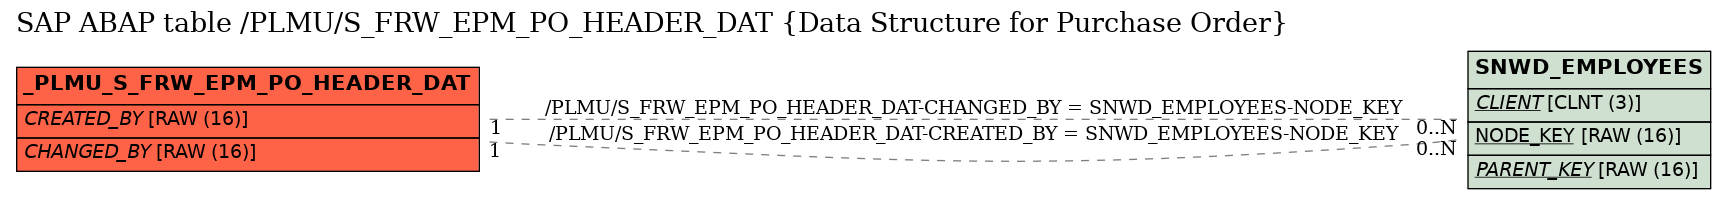 E-R Diagram for table /PLMU/S_FRW_EPM_PO_HEADER_DAT (Data Structure for Purchase Order)